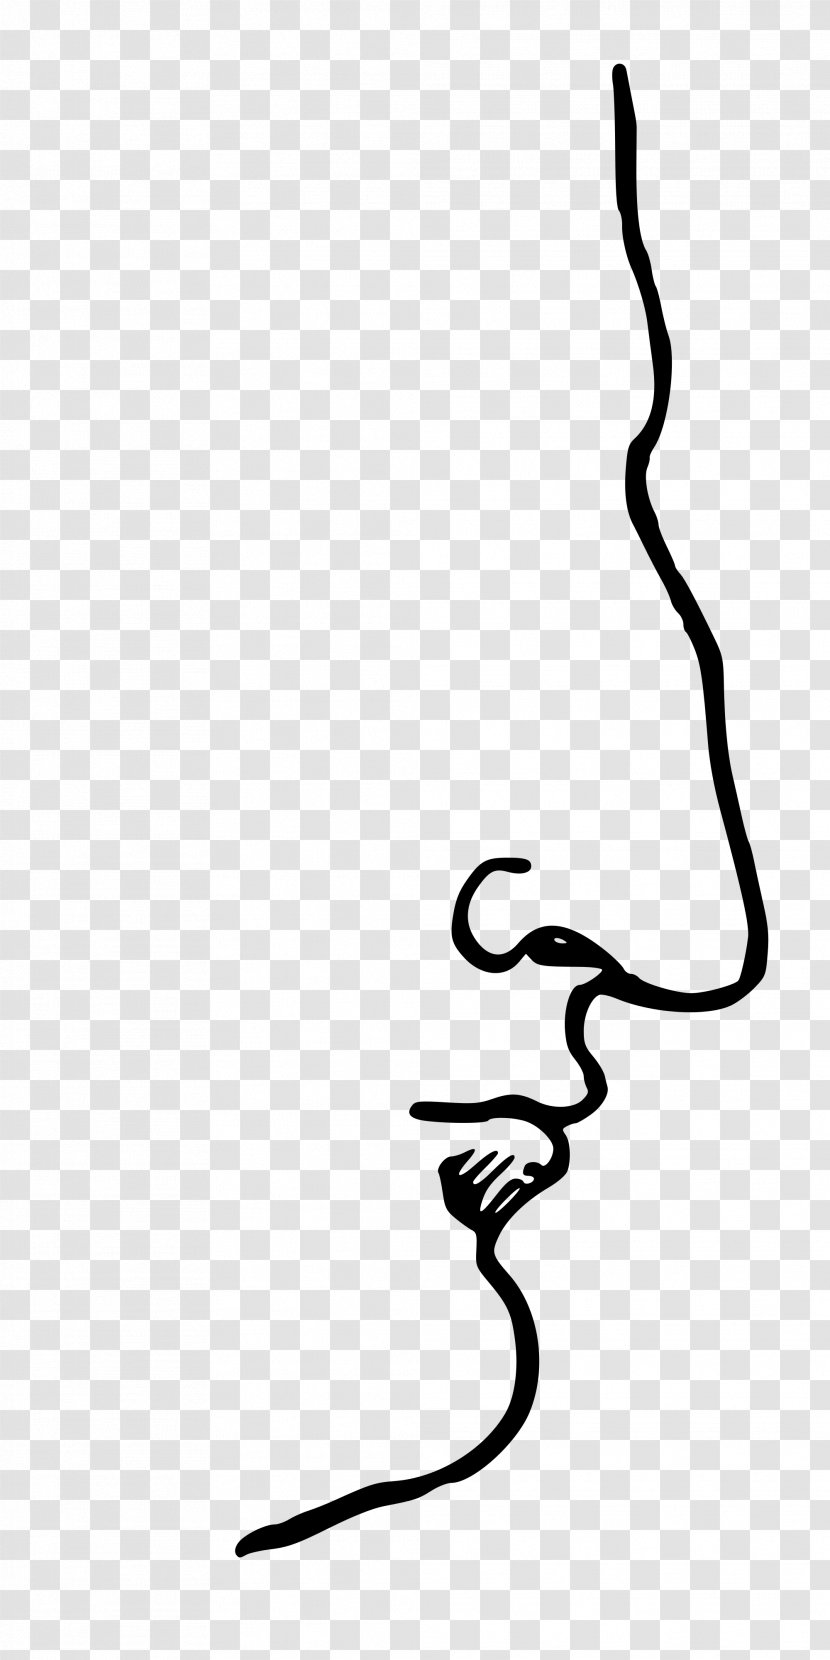 Aquiline Nose Human Eagle Breathing - Facial Vein Transparent PNG